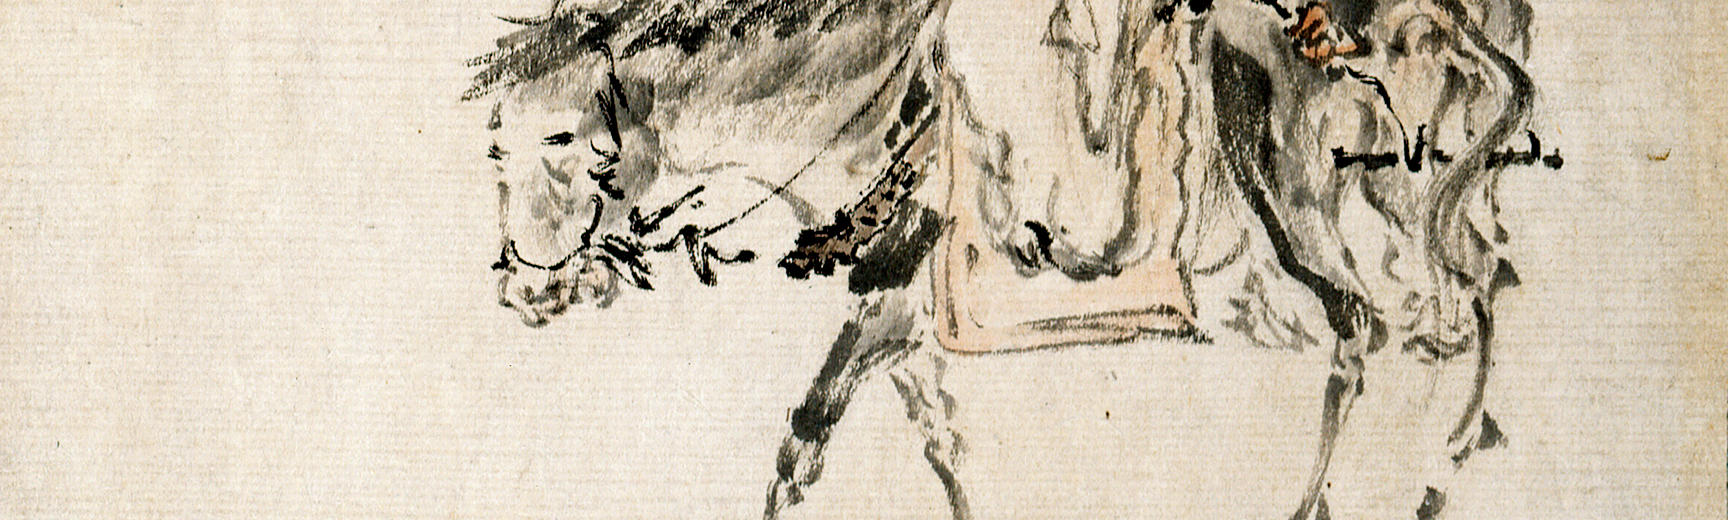 Donkey with calligraphy - detail